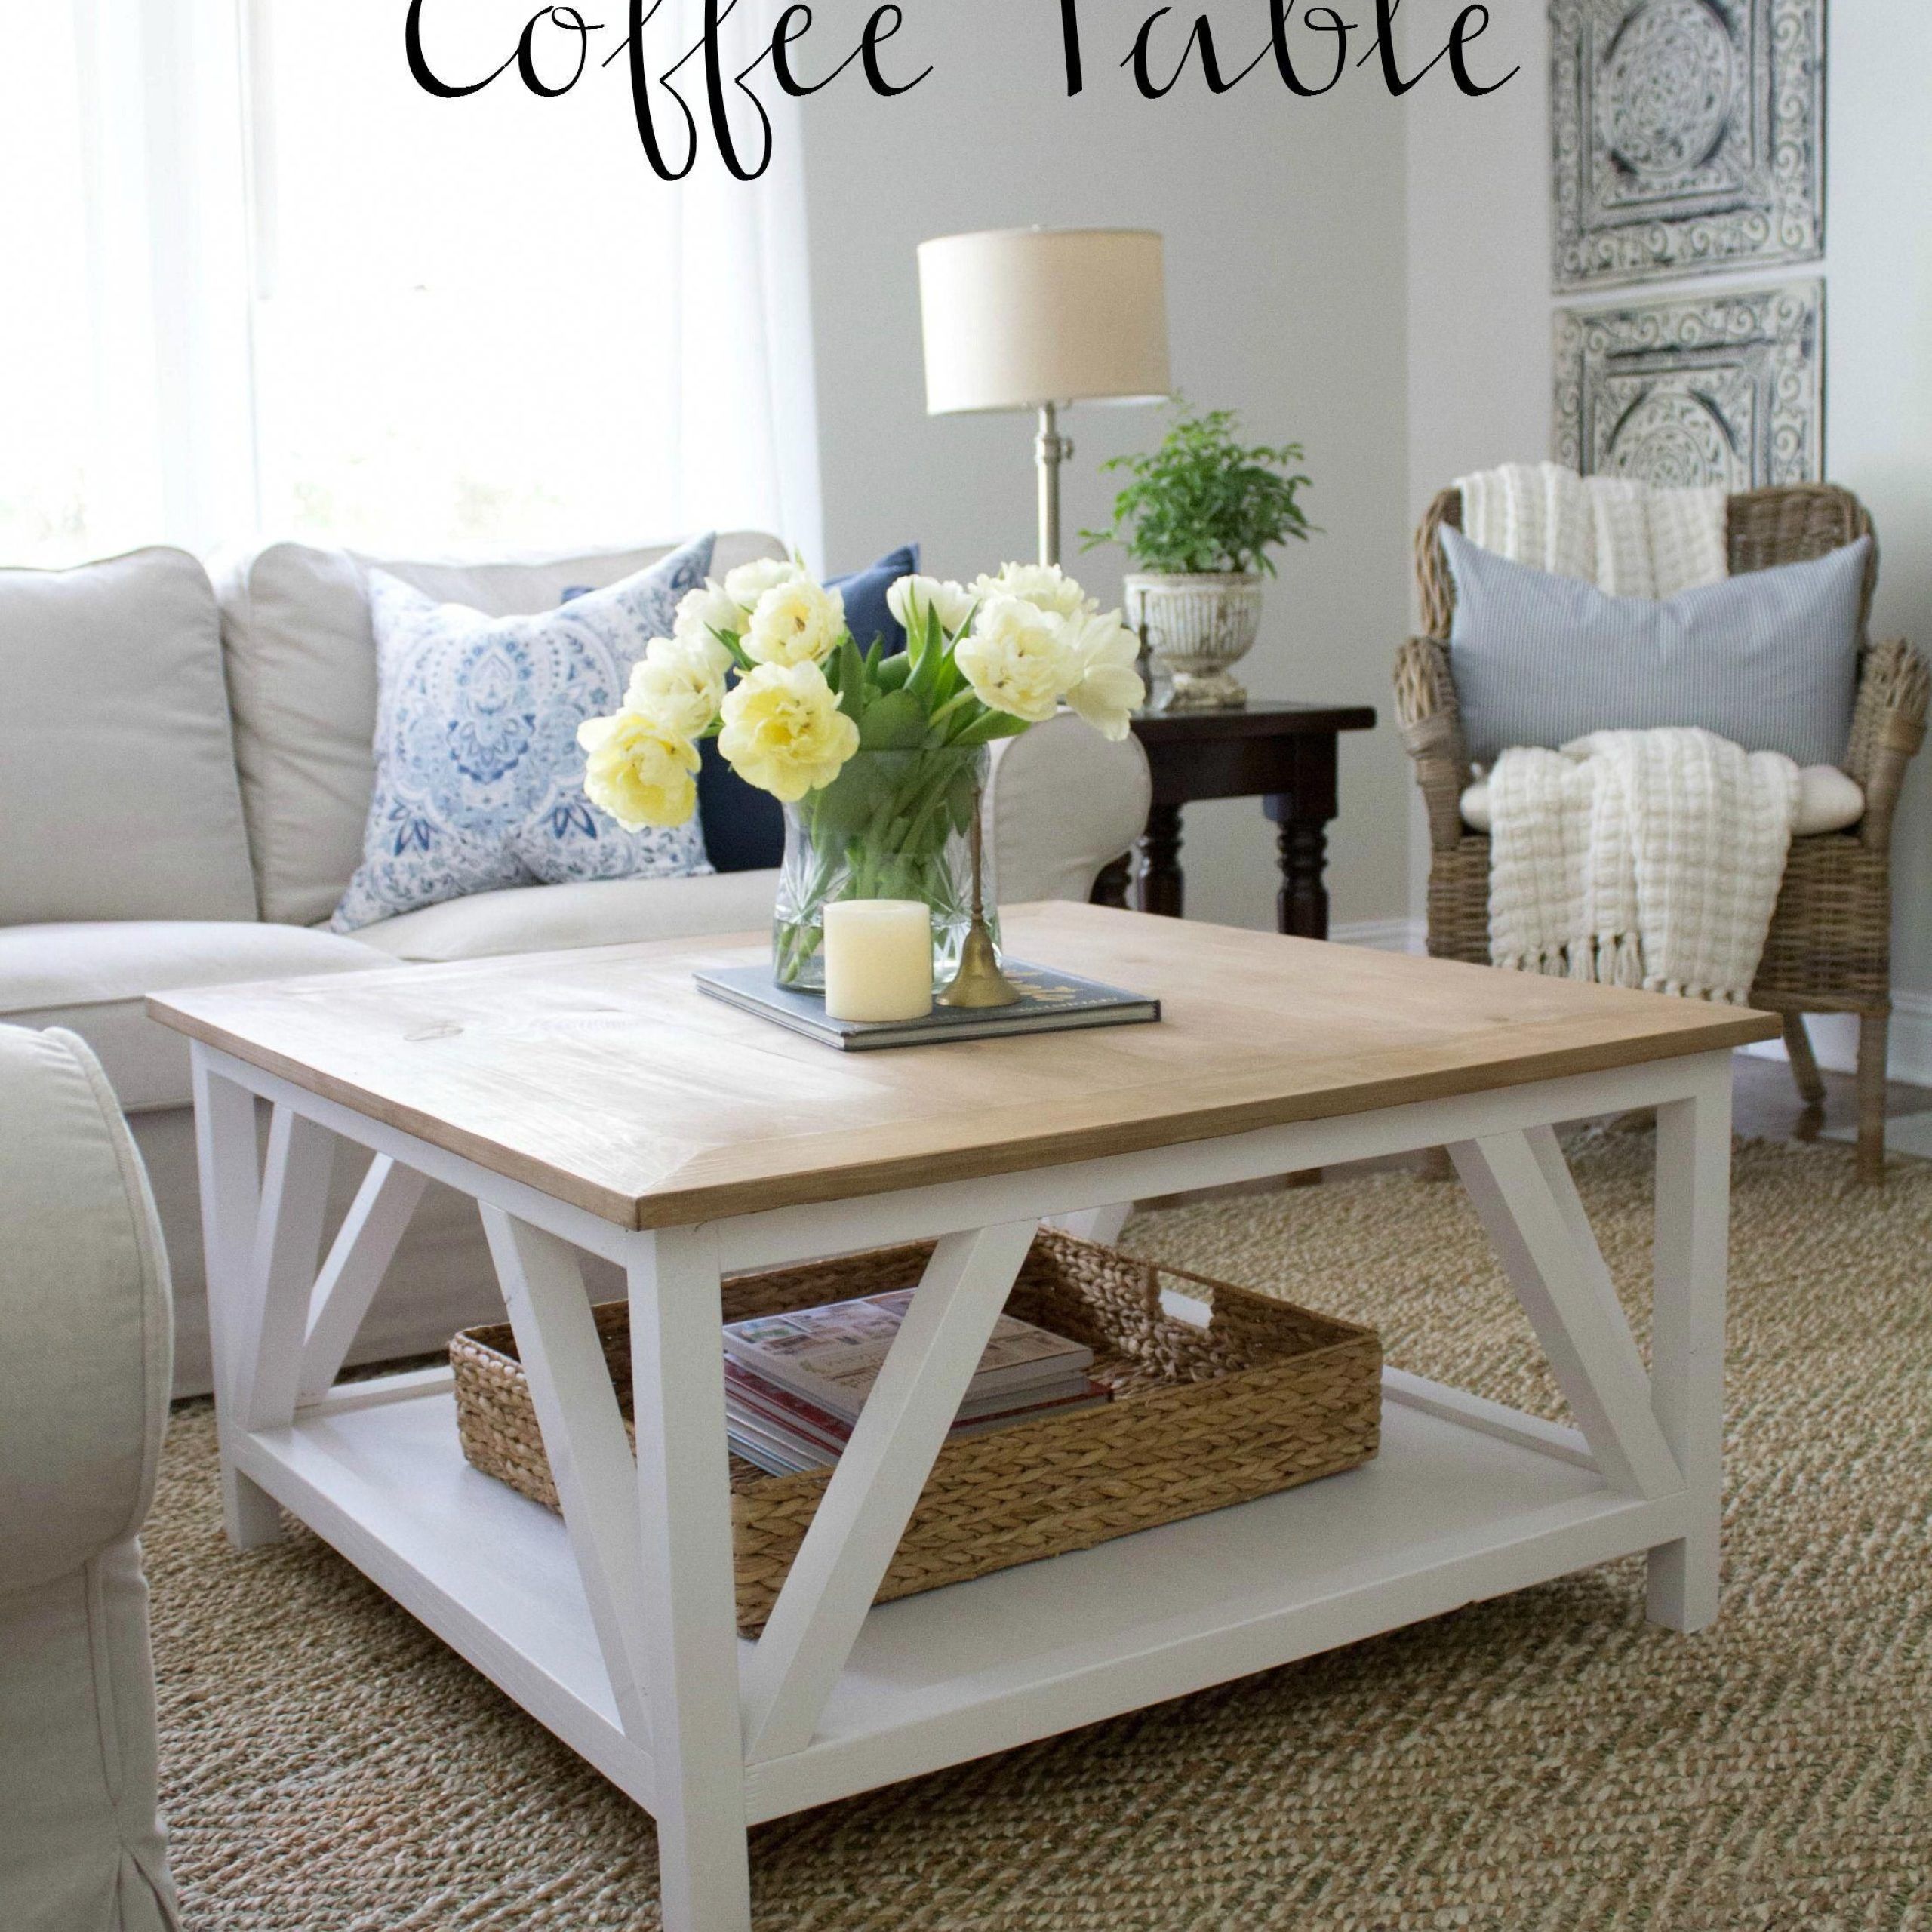 Rustic Farmhouse Coffee Table With Storage / Amazon Com Rustic In Living Room Farmhouse Coffee Tables (View 9 of 20)